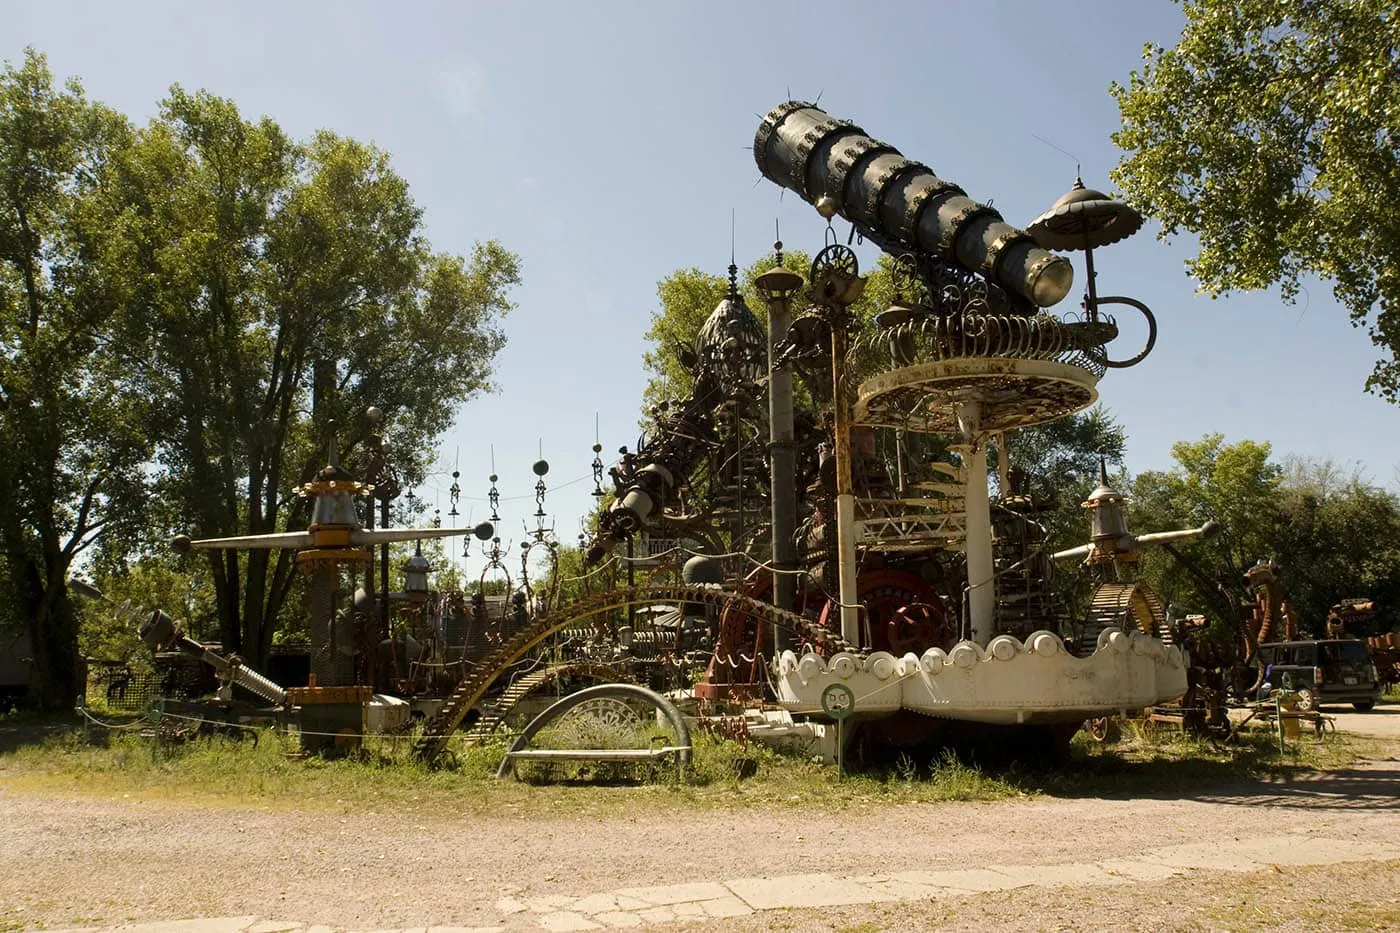 The world's largest scrap metal sculpture, Dr. Evermor's Forevertron at Delaney's Surplus Sales in Sumpter, Wisconsin, is meant for intergalactic travel. Visit this weird roadside attraction on a Wisconsin road trip.